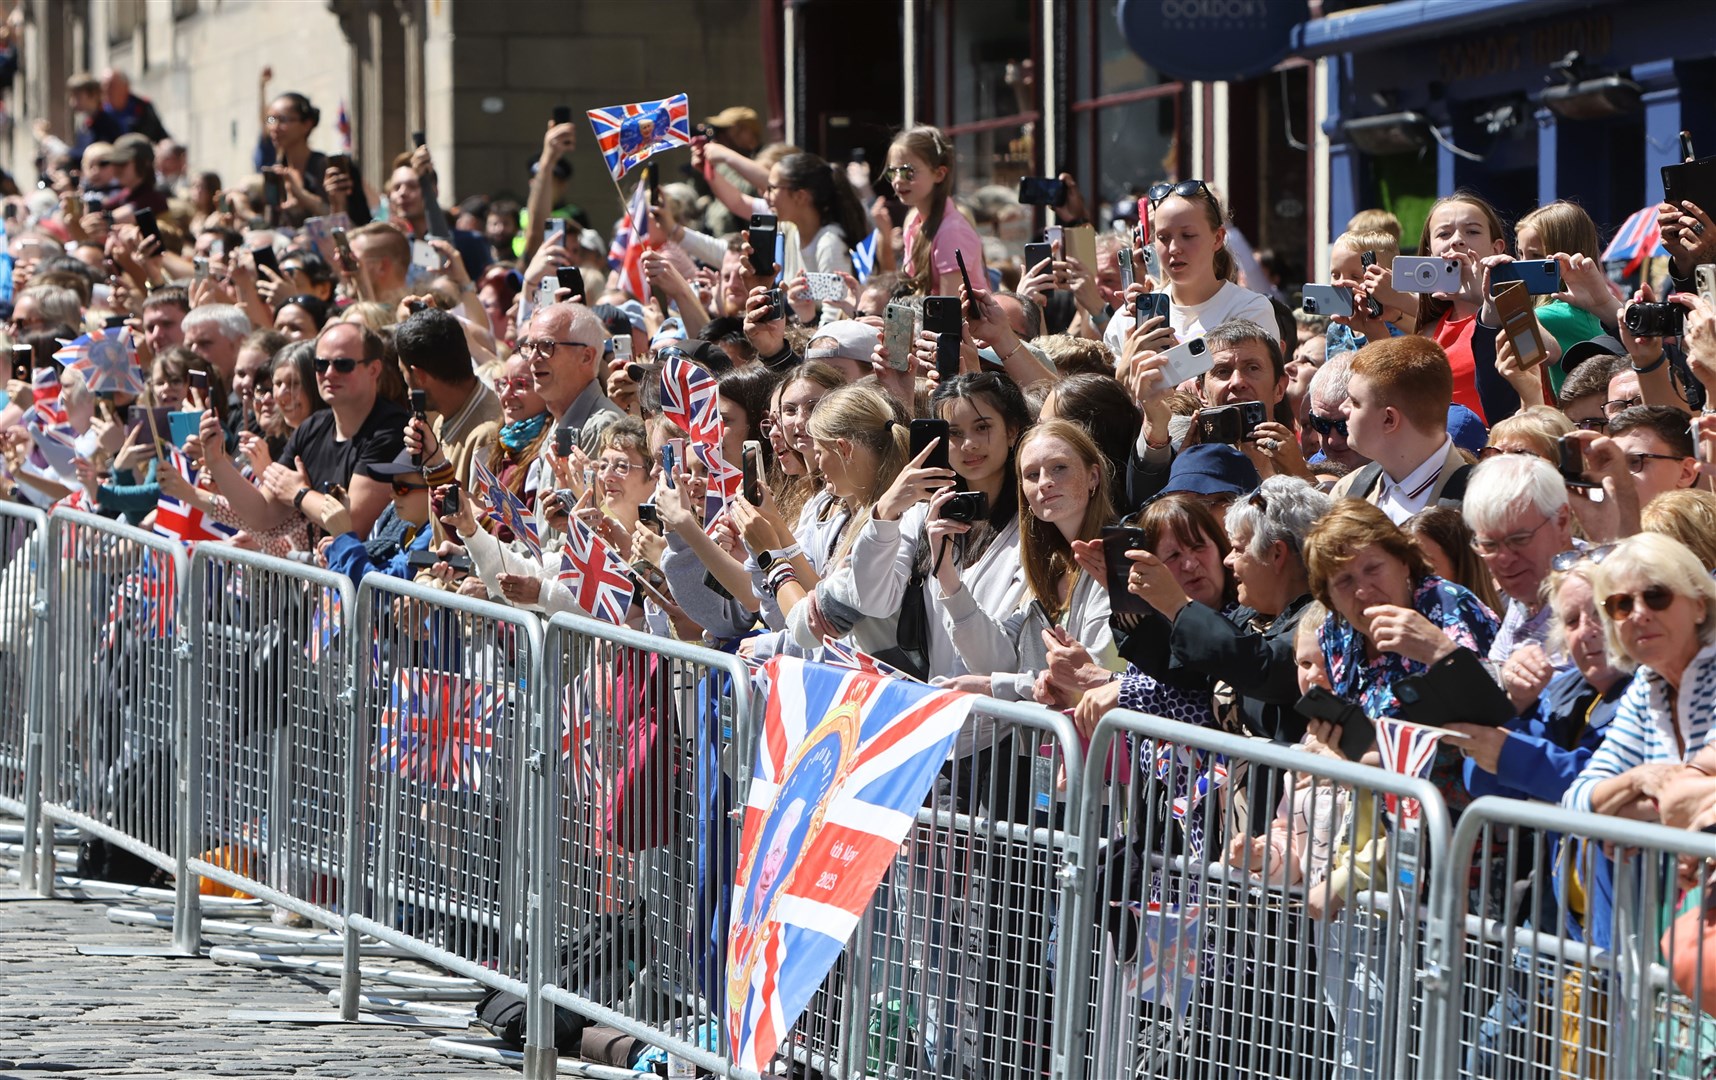 Crowds watch the procession on the Royal Mile (Colin Mearns/Herald & Times Group/PA)